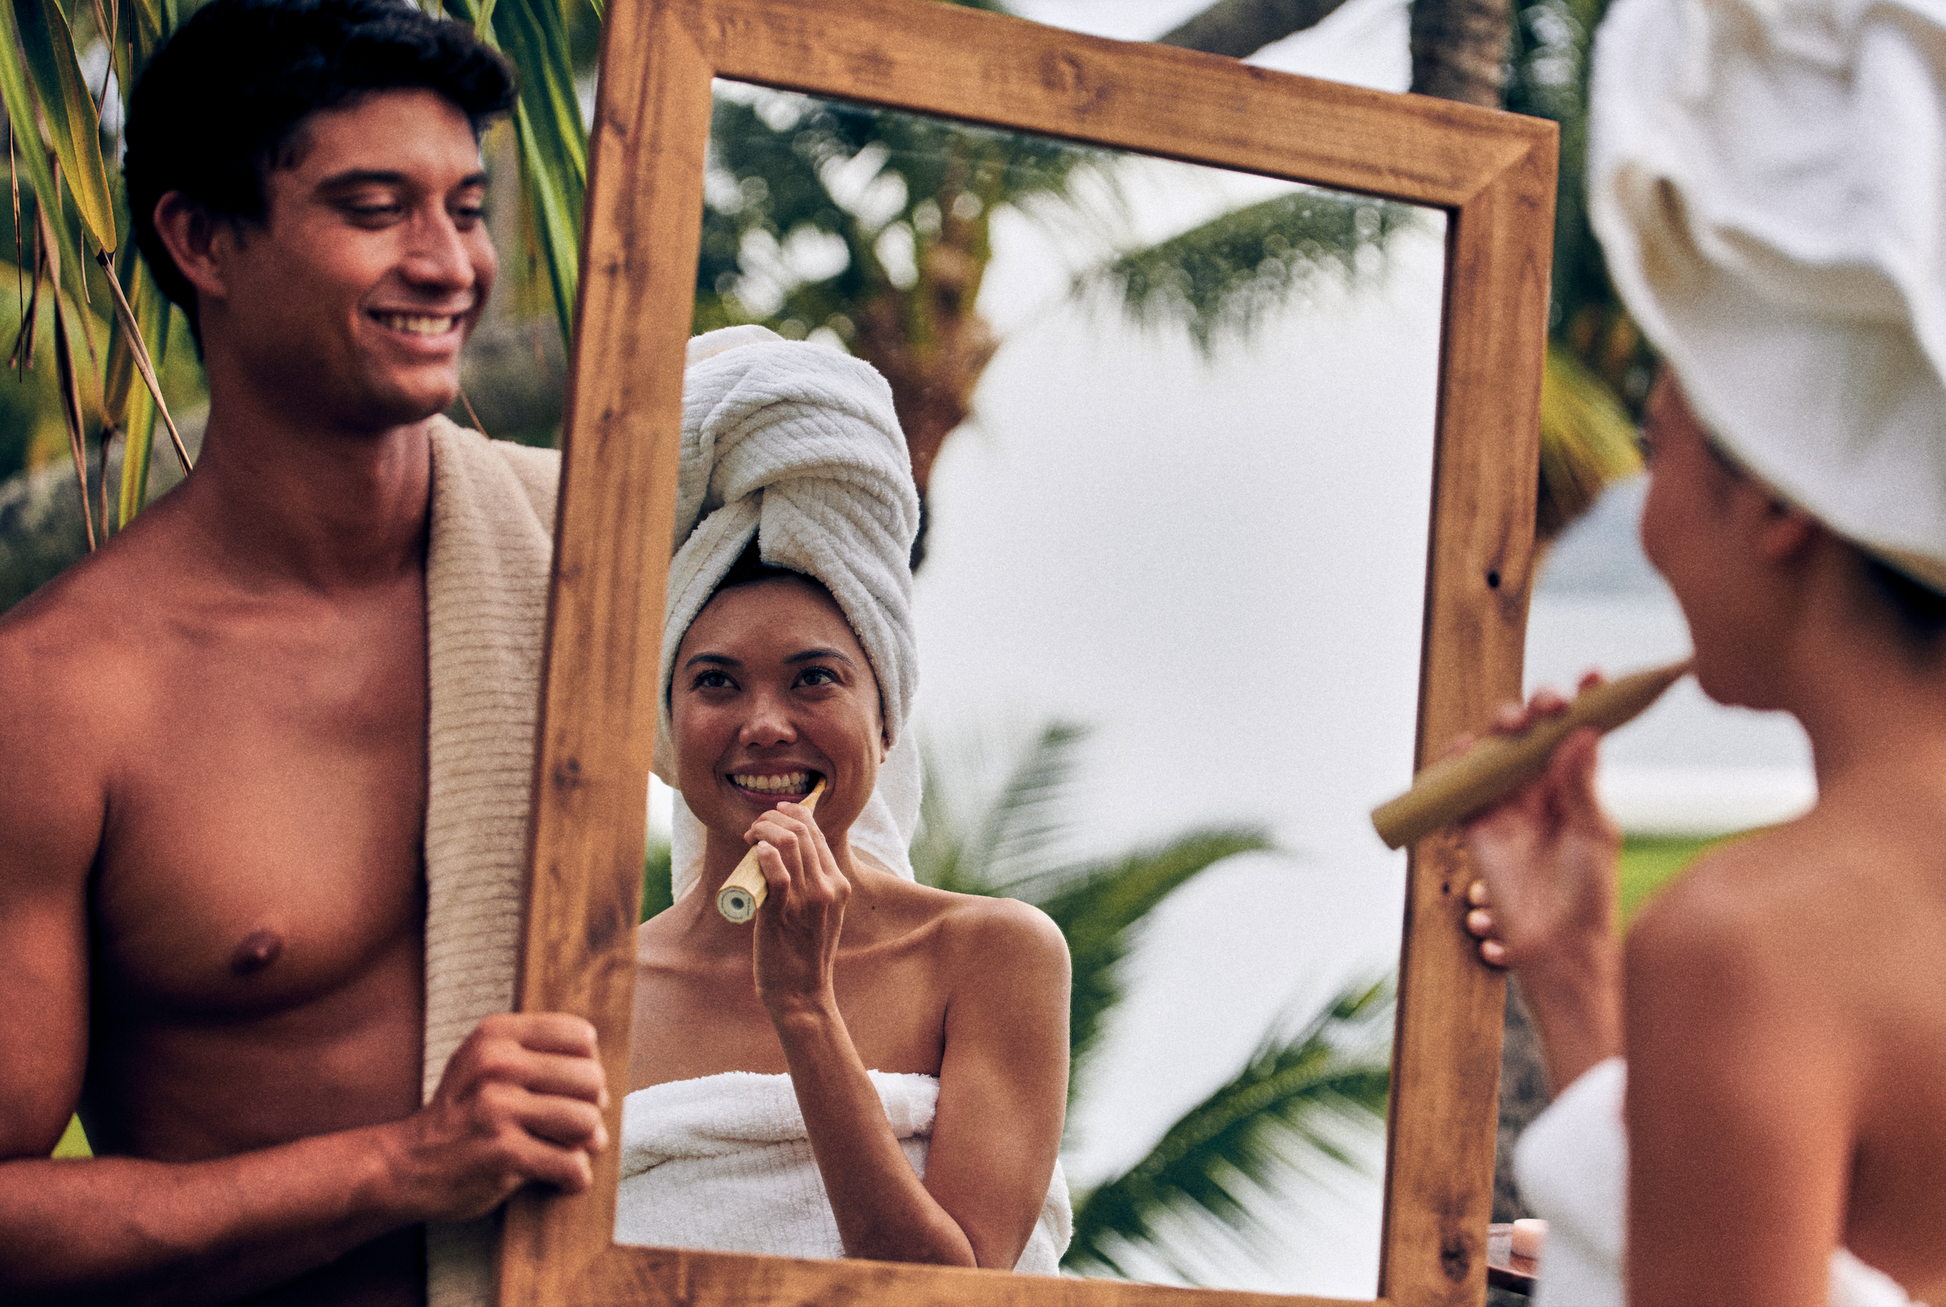 This image shows a woman brushing her teeth with a sonic bamboo electric toothbrush and US-made fluoride free mint toothpaste tablets while looking into a mirror that a shirtless man is holding